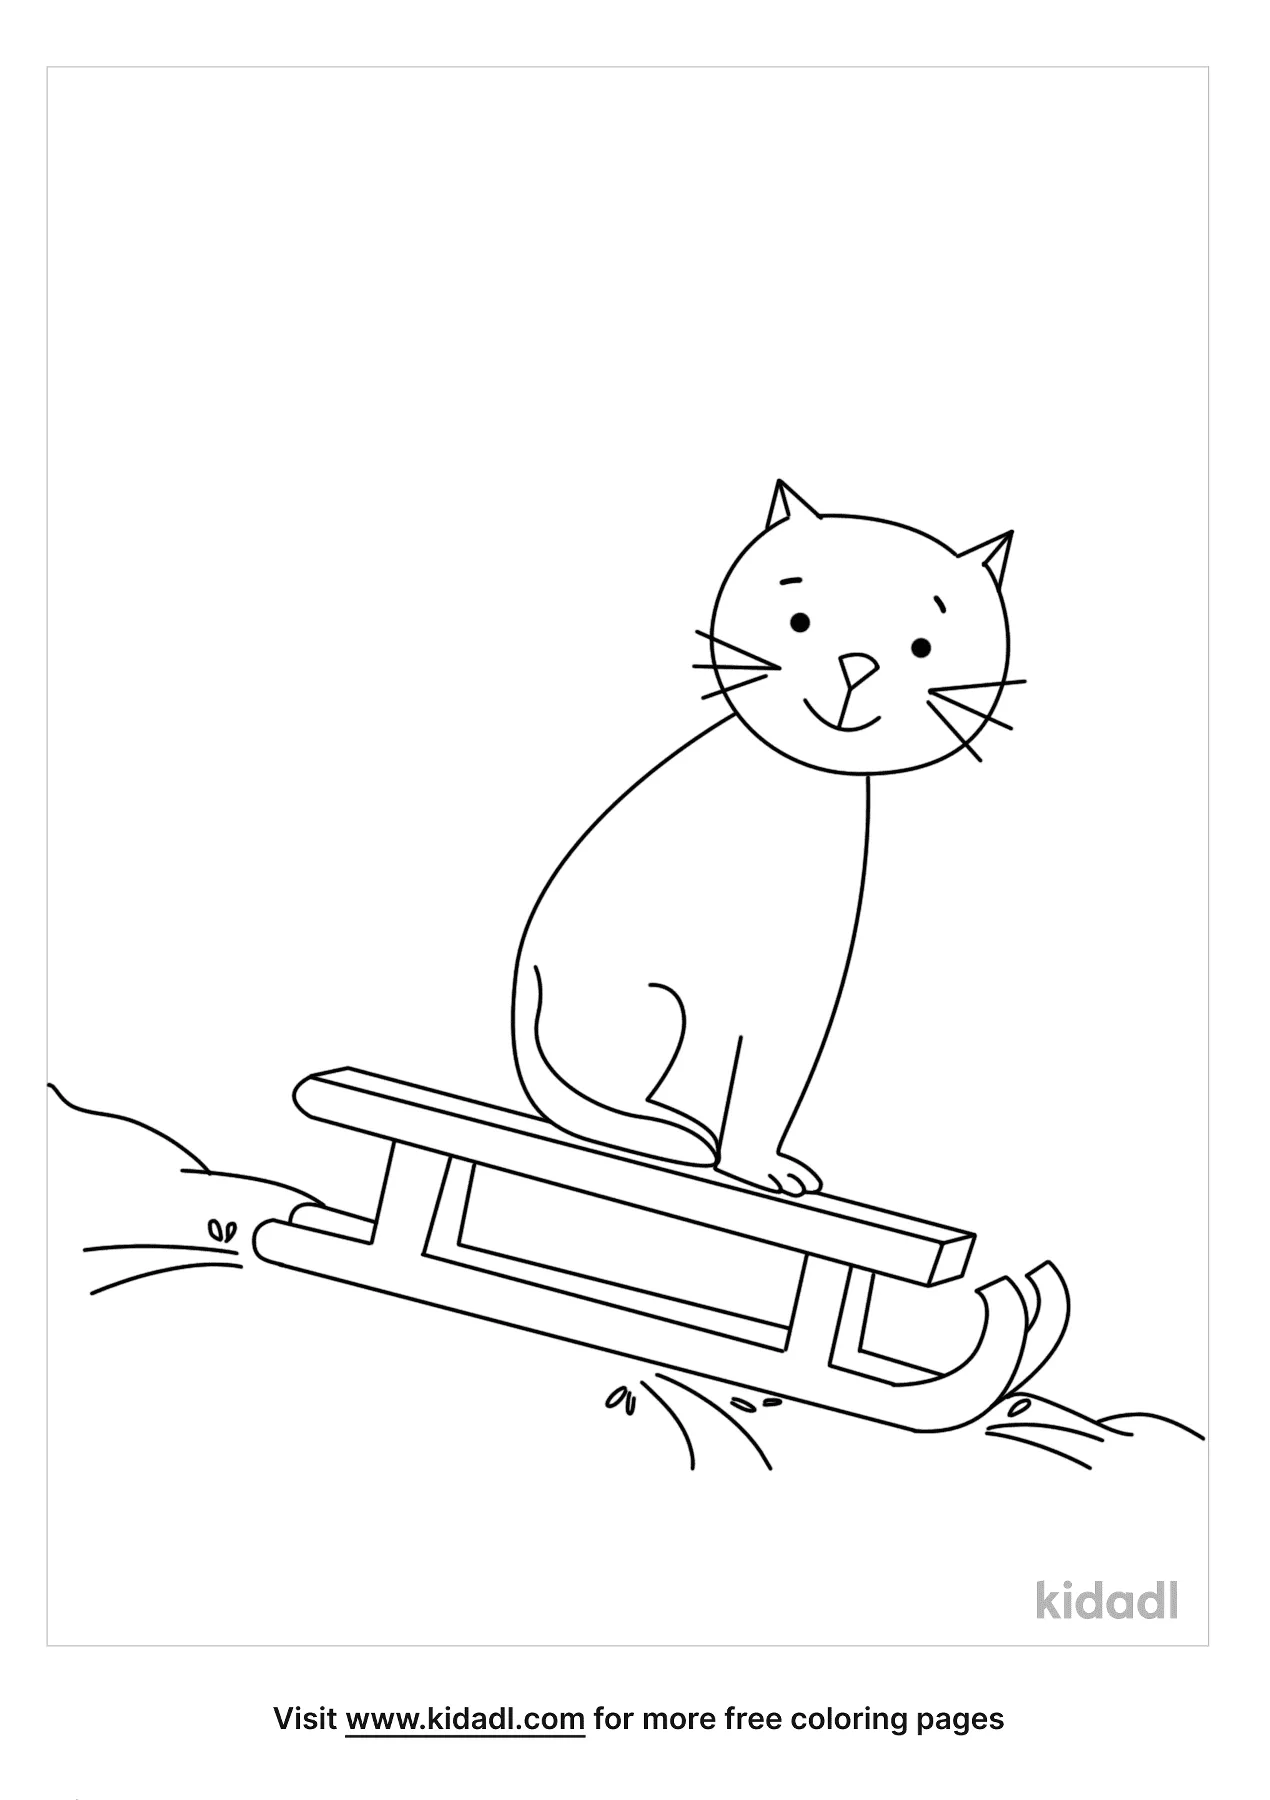 Free Sled Coloring Page | Coloring Page Printables | Kidadl